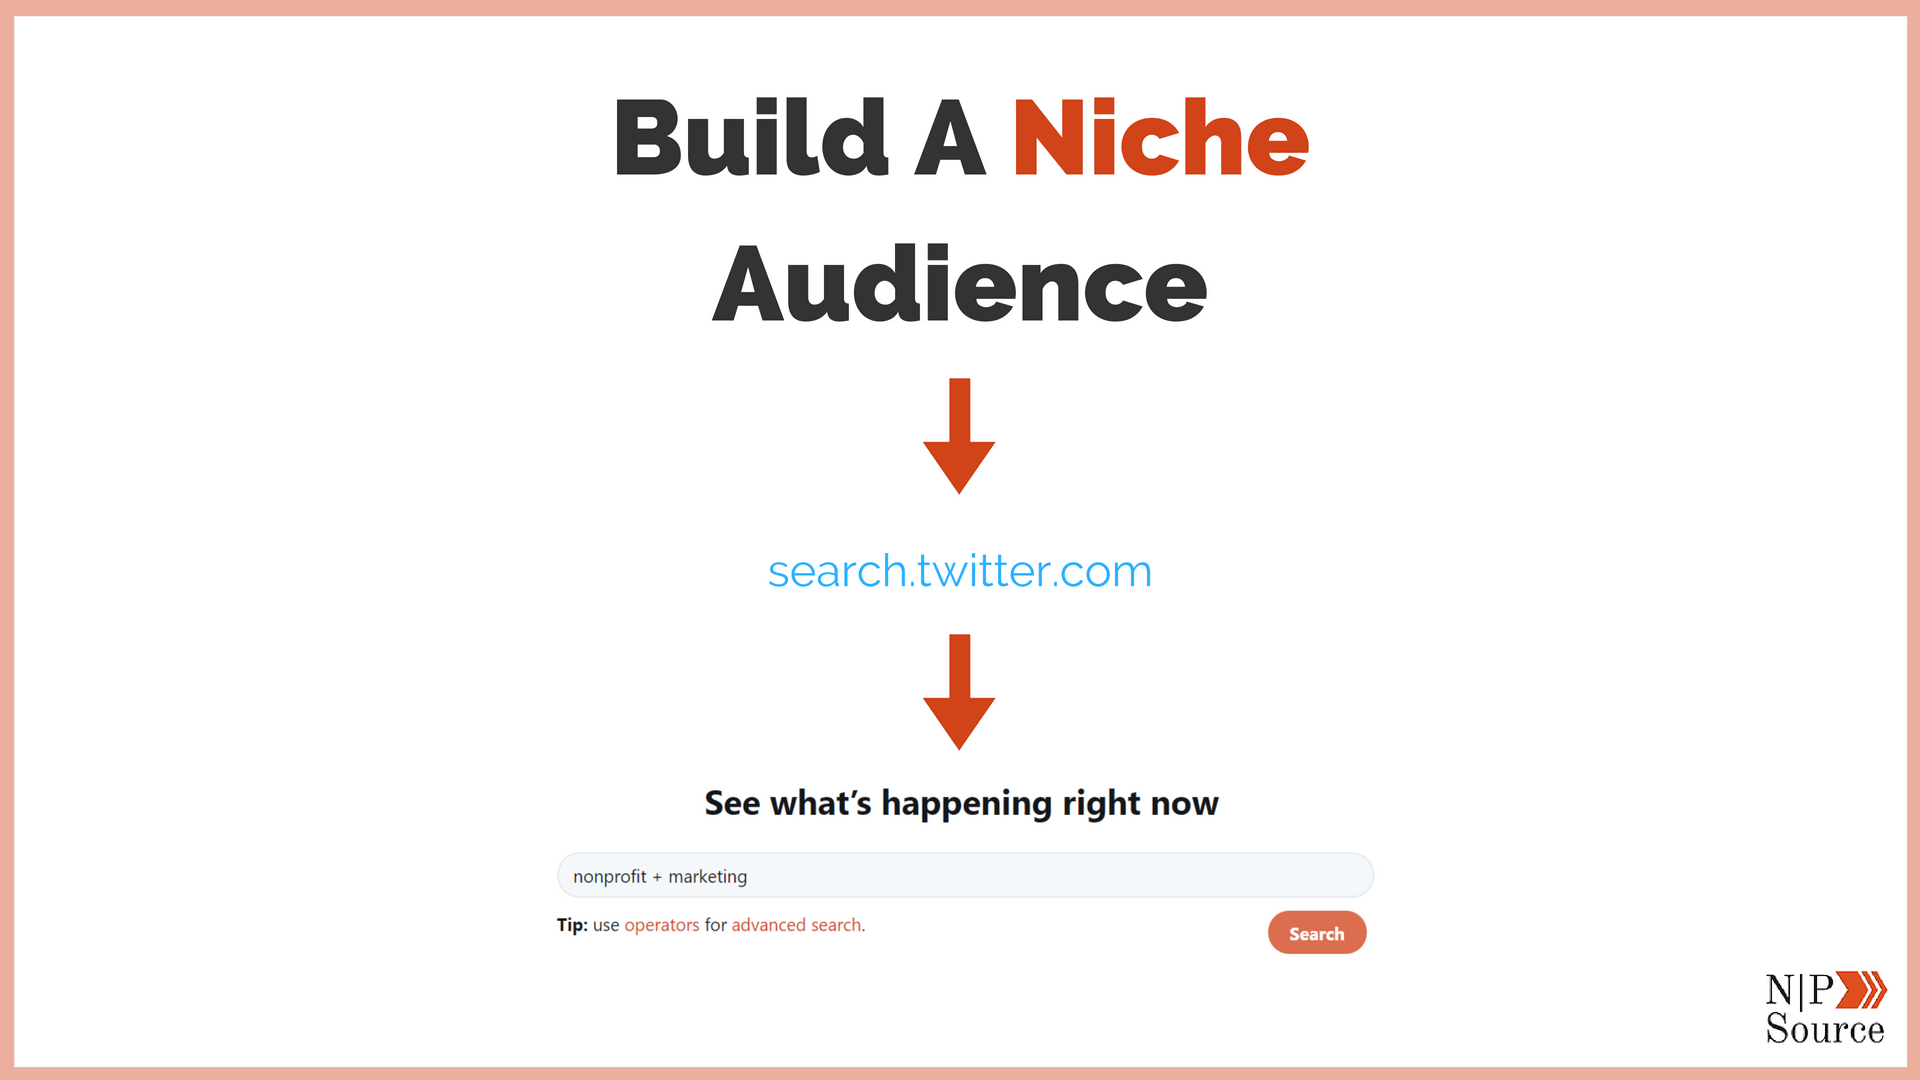 How To Build A Niche Audience - Nonprofits Source